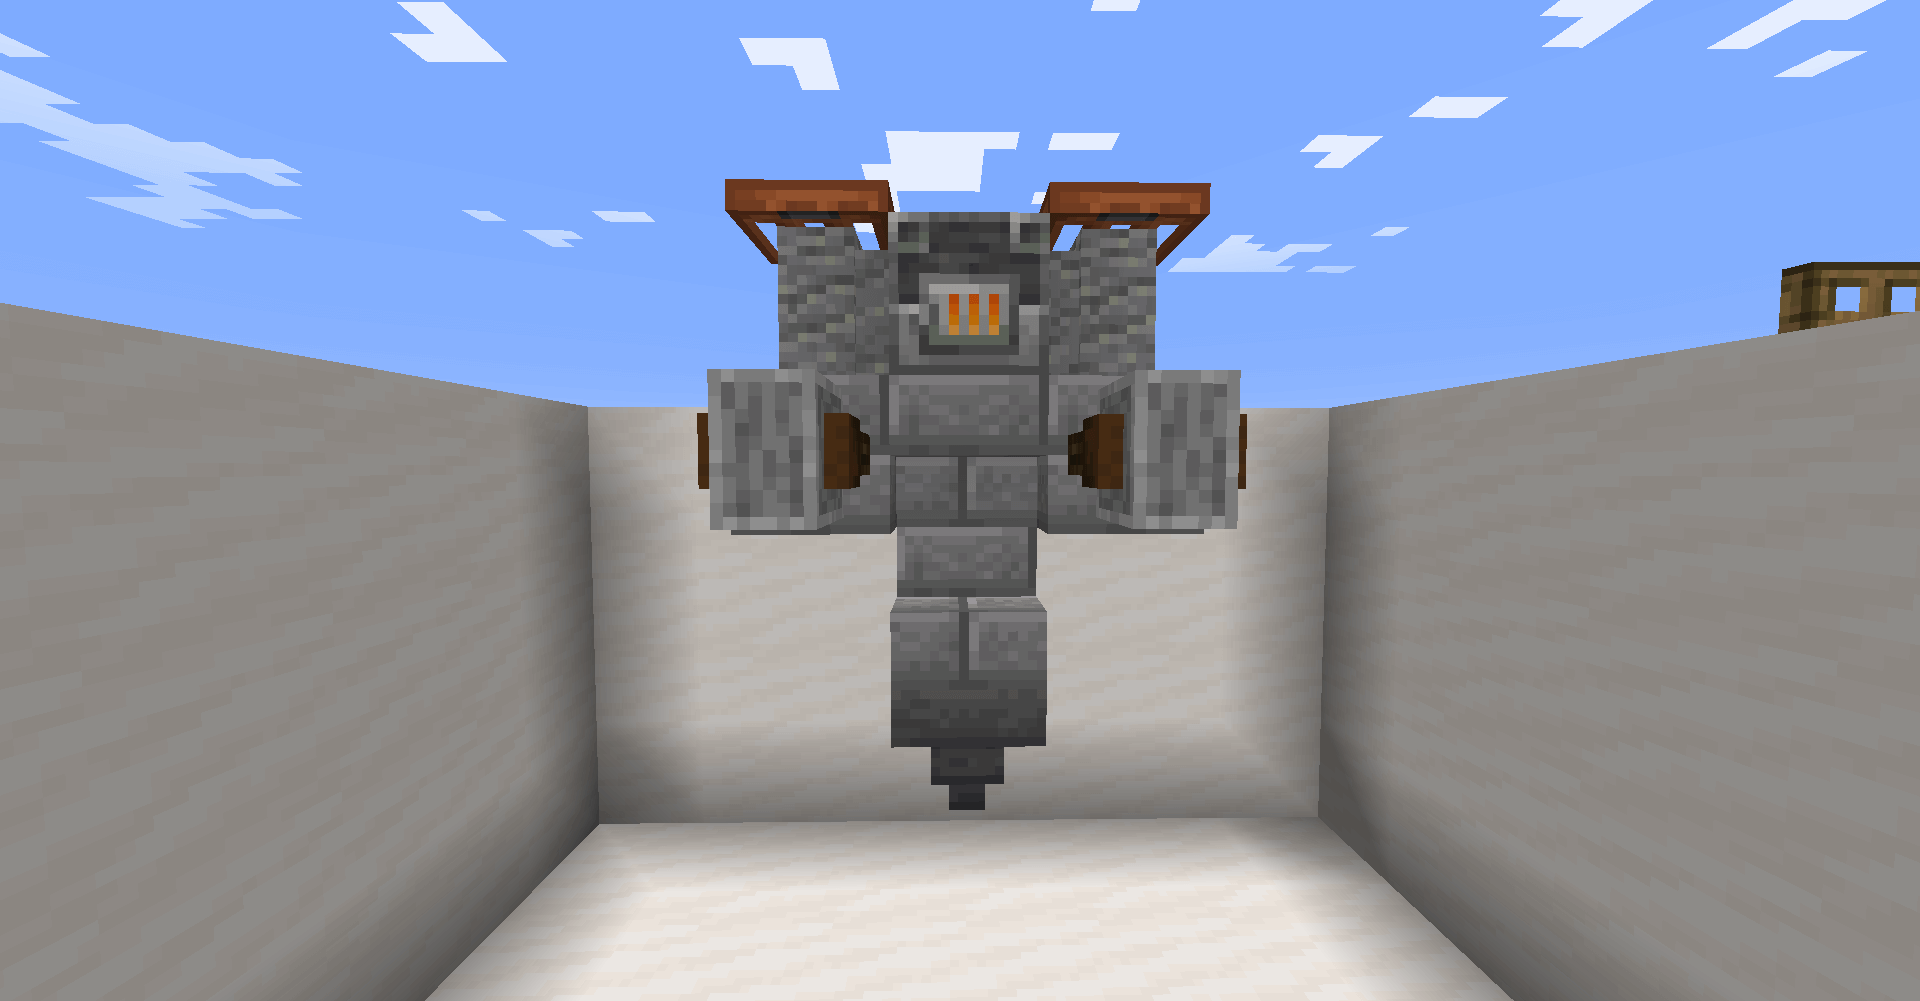 Flying Robot with Blast Furnace and Hopper Final 3